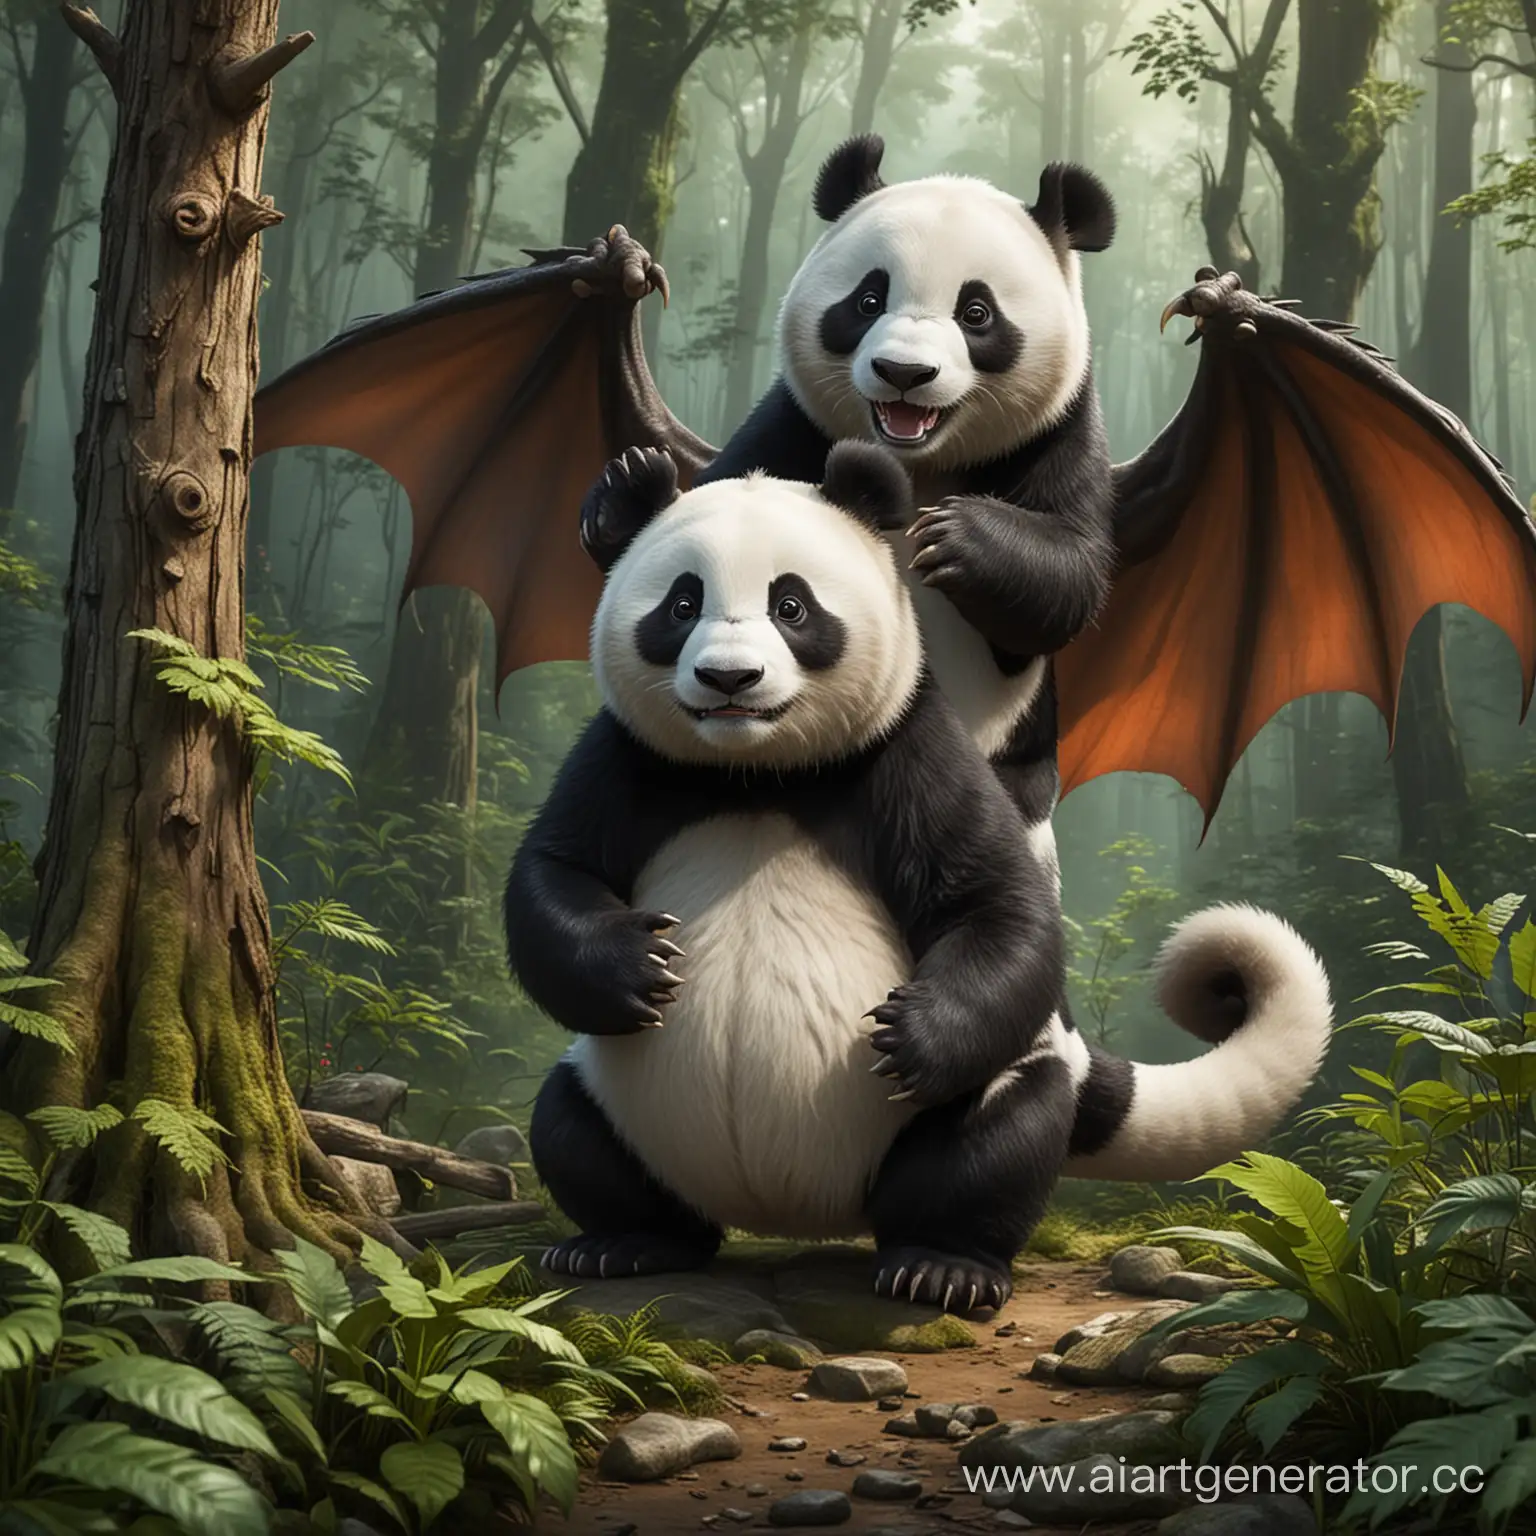 dragon and panda in forest